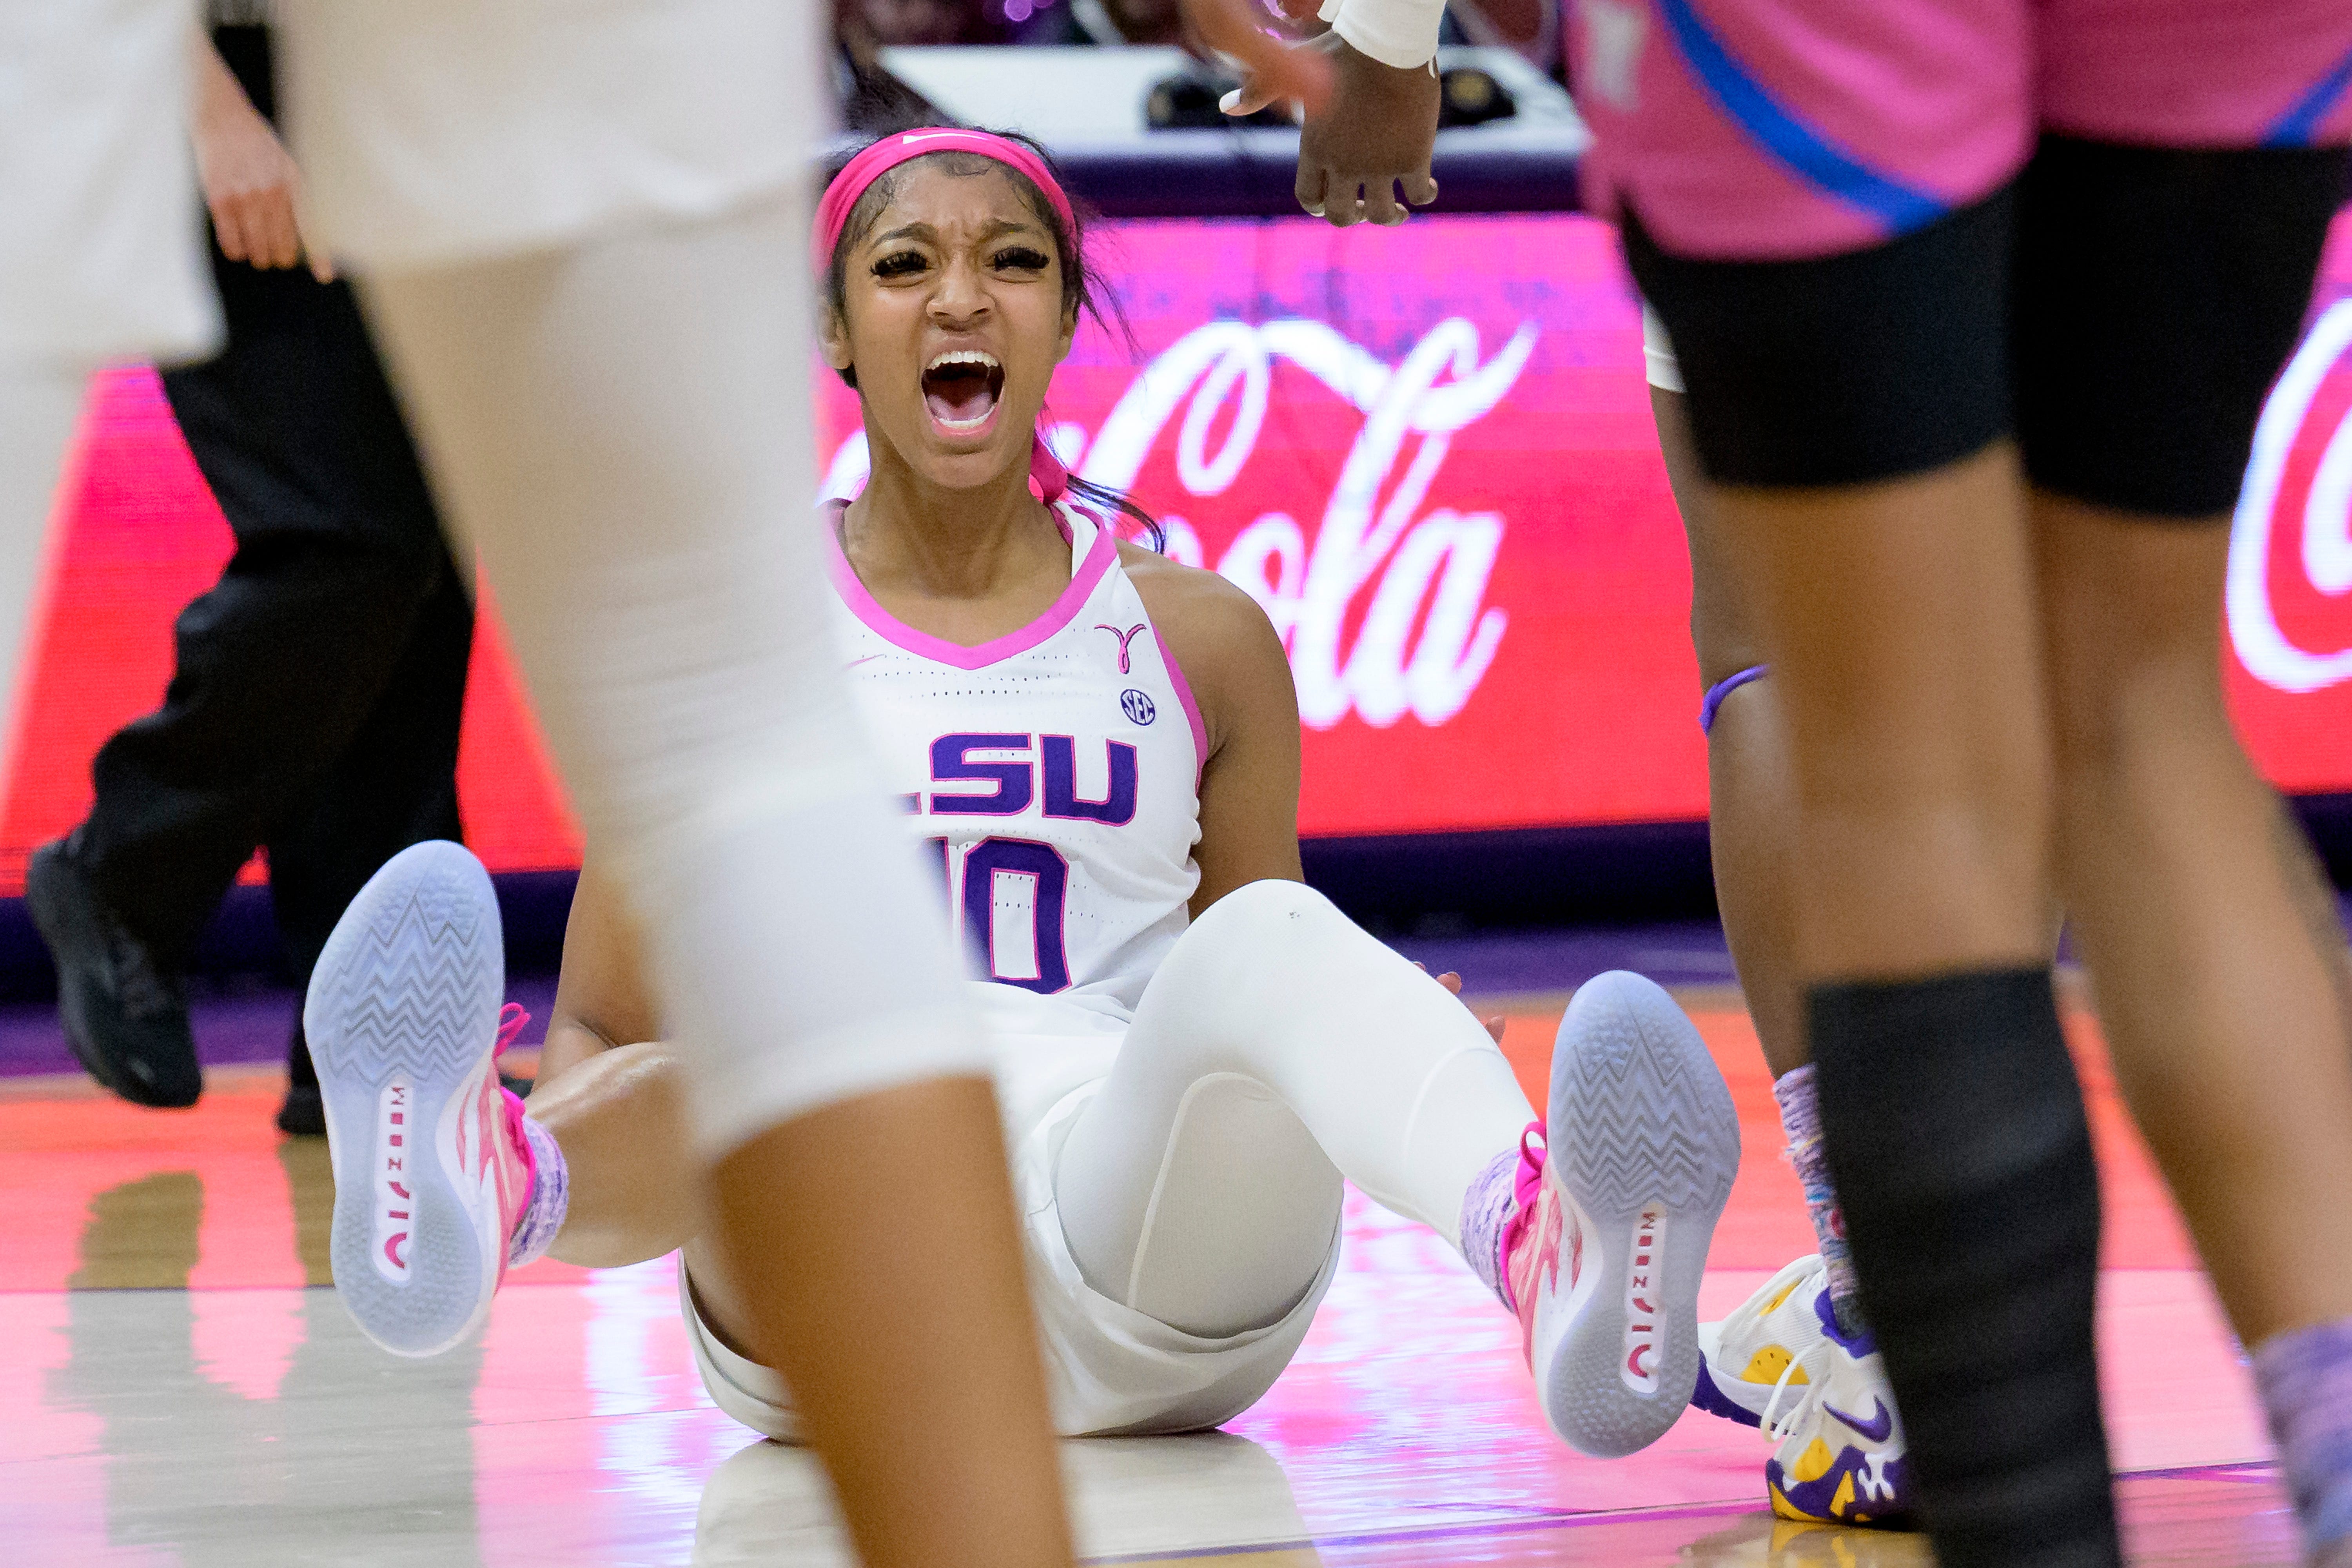 LSU forward Angel Reese (10) slaps her hands on the floor after scoring a basket and getting fouled for an additional free throw shot in the second half of an NCAA college basketball game against Mississippi, Thursday, Feb. 16, 2023, in Baton Rouge, La. (AP Photo/Matthew Hinton)